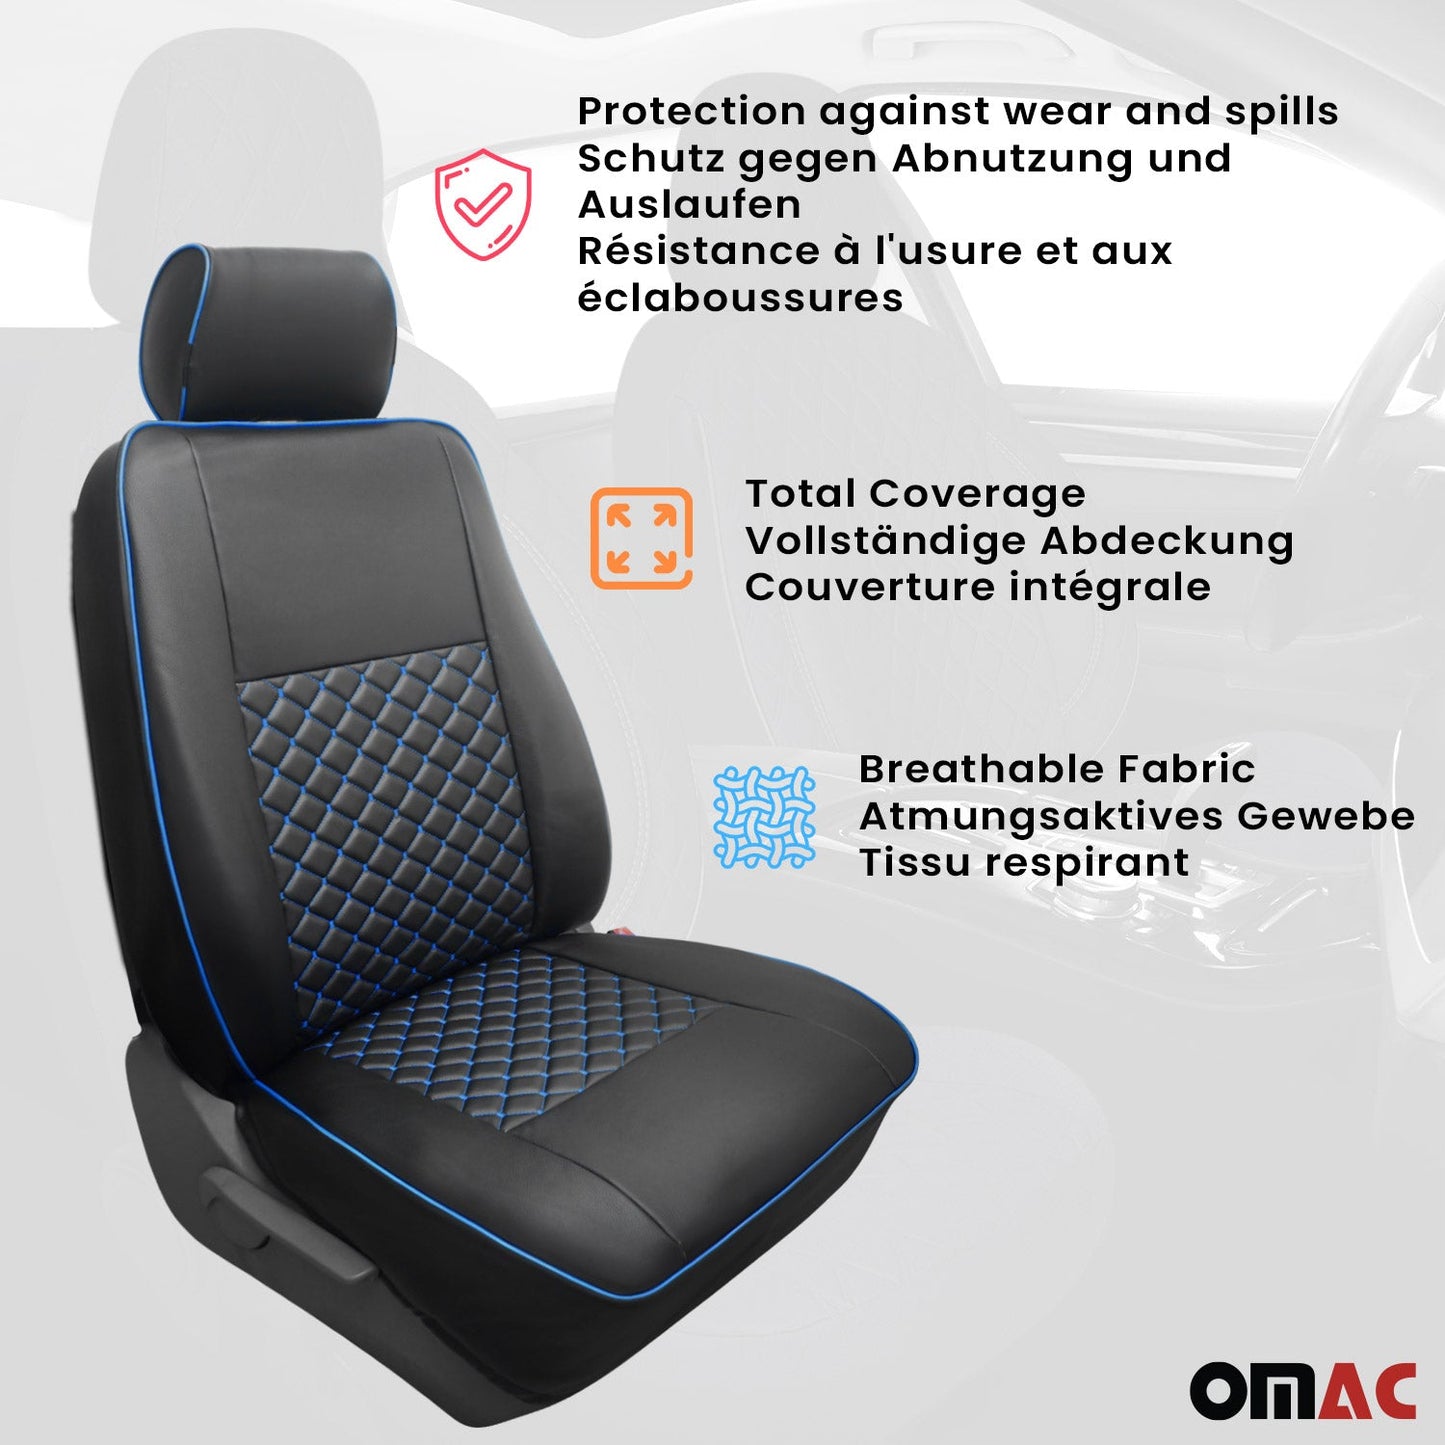 OMAC Leather Car Seat Covers Protector for VW Eurovan 1993-2003 Black Blue 2+1 7521321SM-2